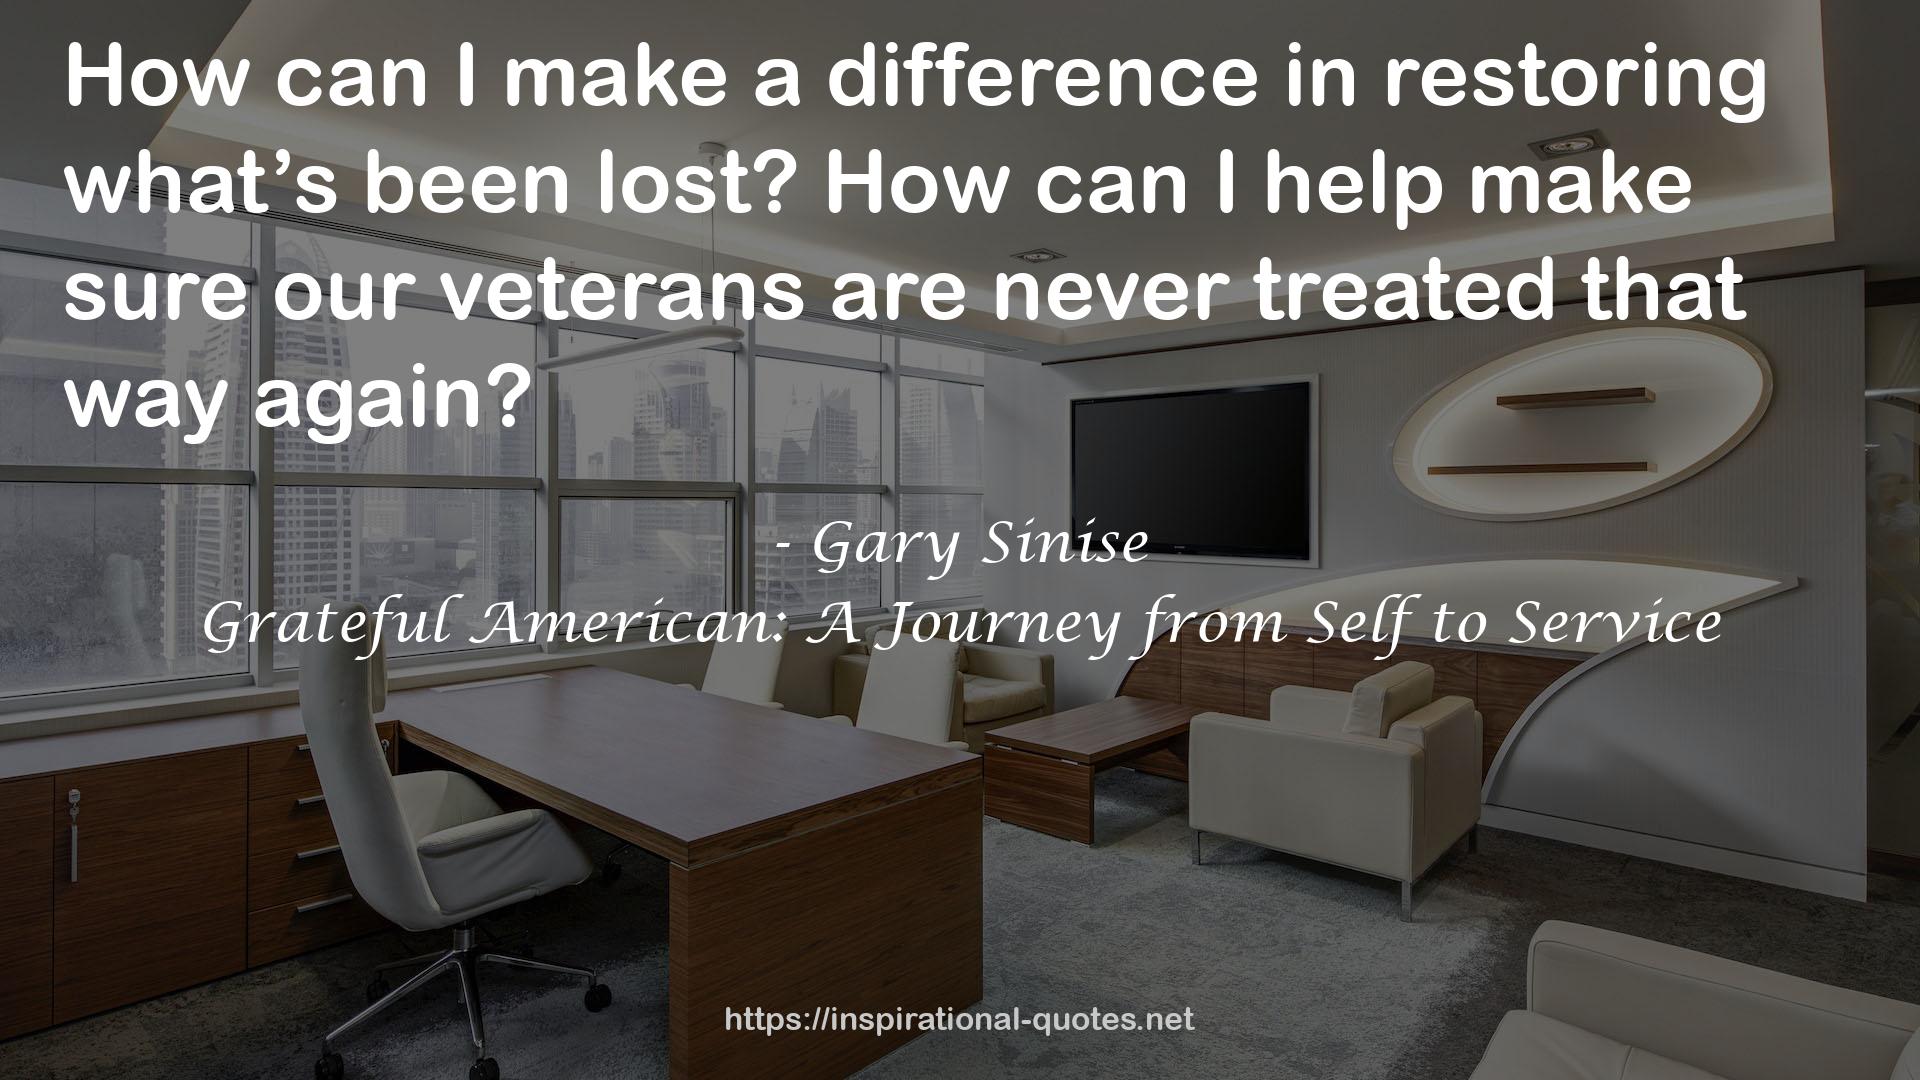 Grateful American: A Journey from Self to Service QUOTES